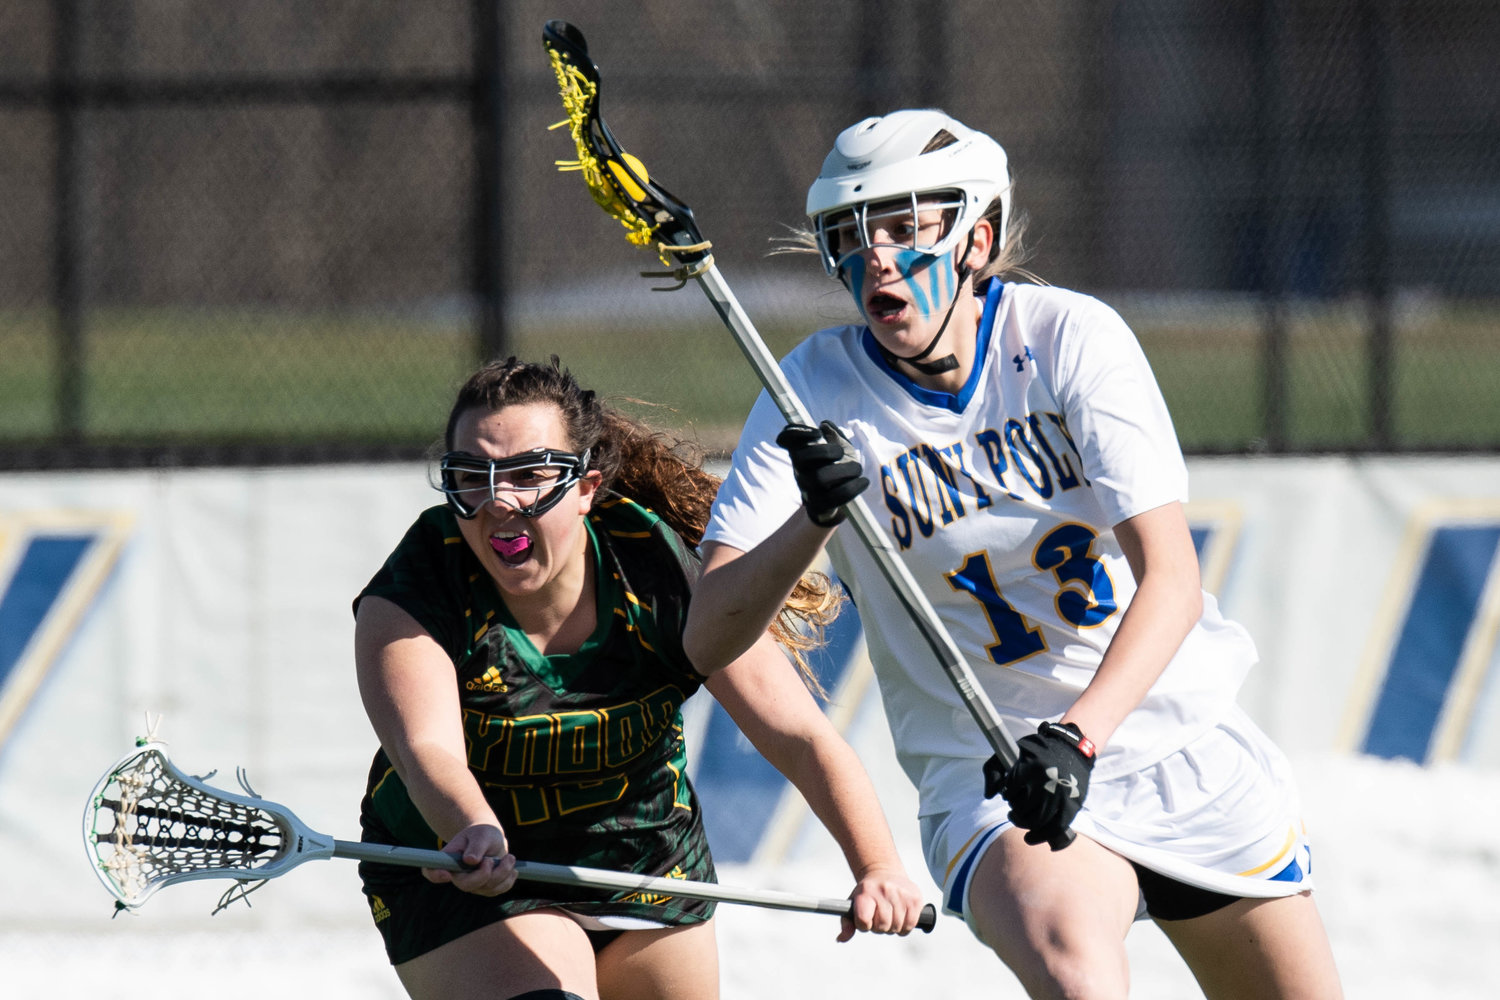 LEADING THE WAY — SUNY Polytechnic Institute women’s lacrosse player Molly Burdick (13) moves in for a shot during the game against Northern-Vermont Lyndon on Wednesday. Burdick, of Vestal, scored 10 goals and had one assist as the Wildcats won their first game of the season with an 18-4 victory.